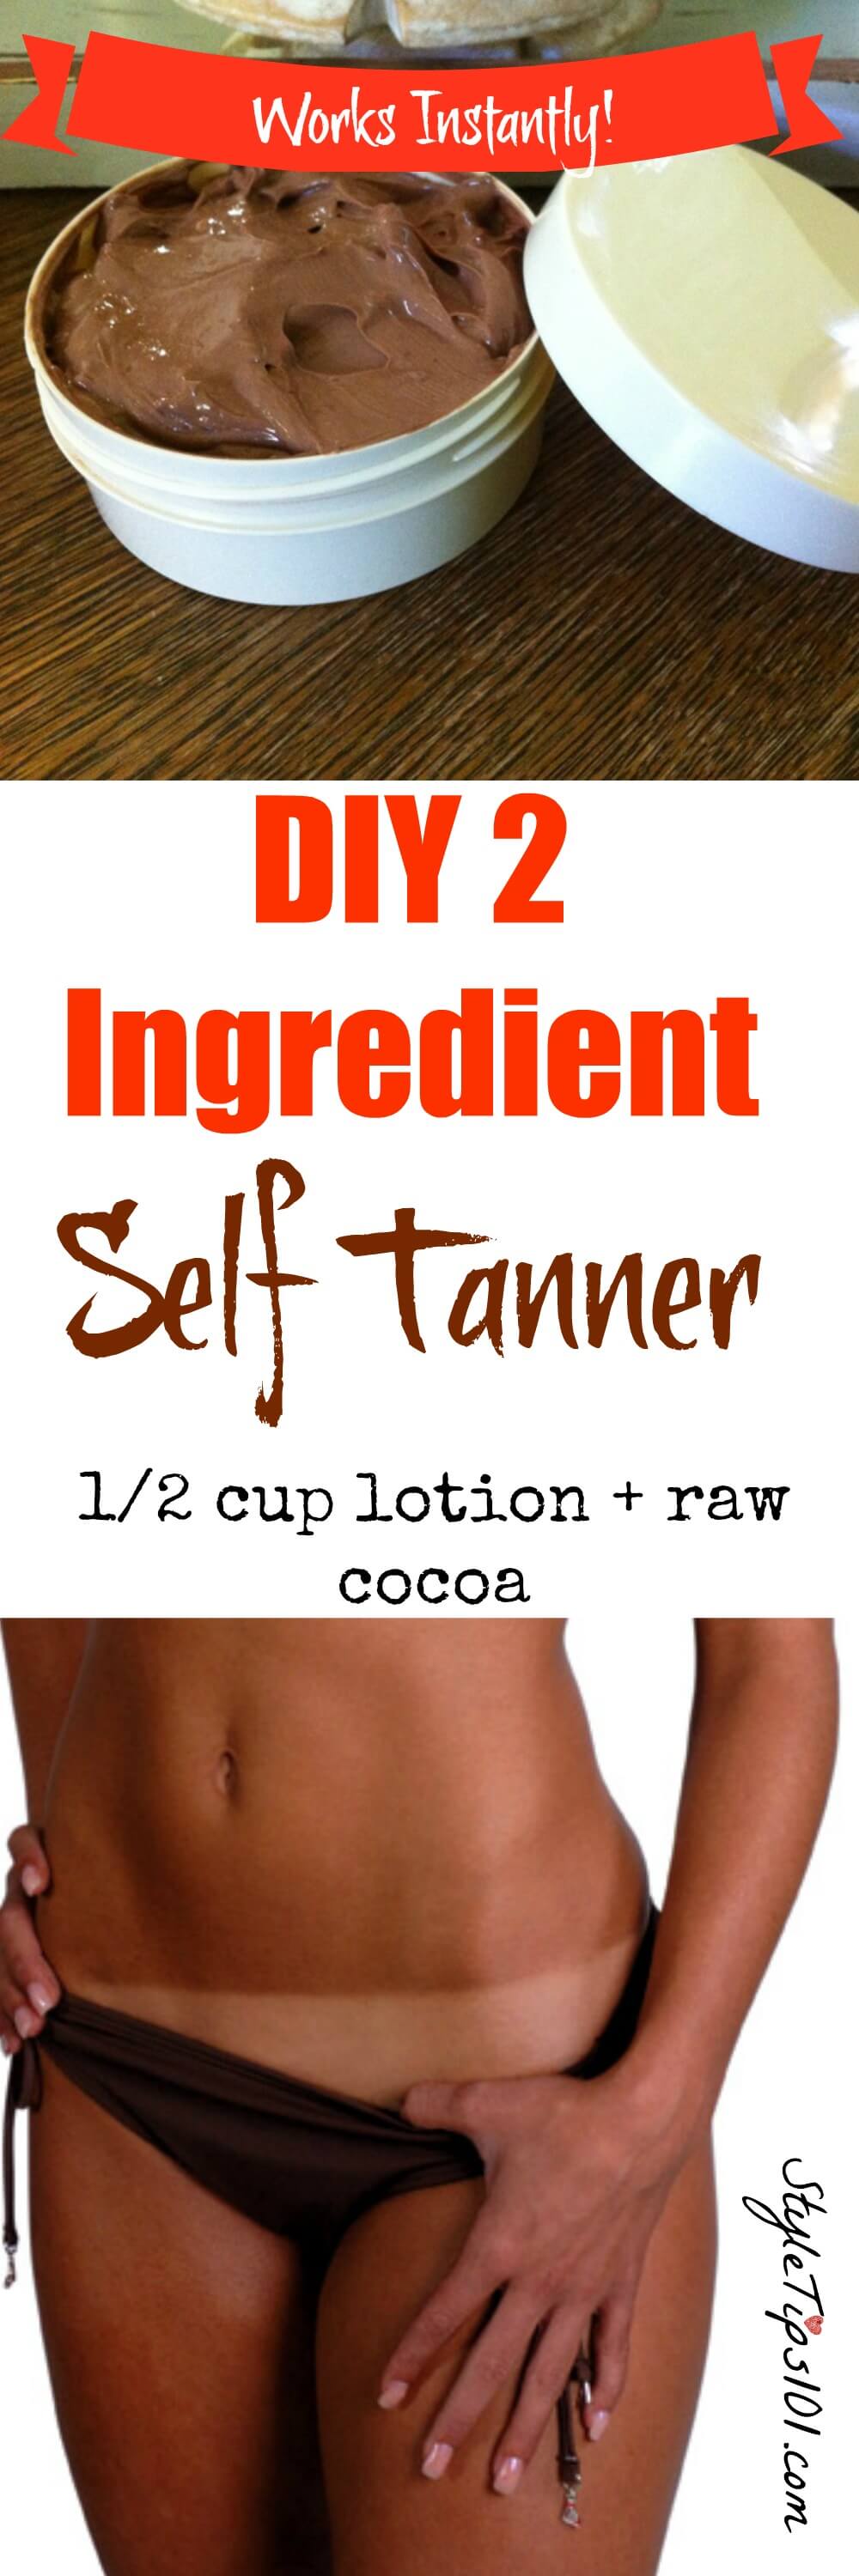 self tanner diy styletips101 tanning tan face don orange beauty works well super easy prepare skin natural recipe forget recipes